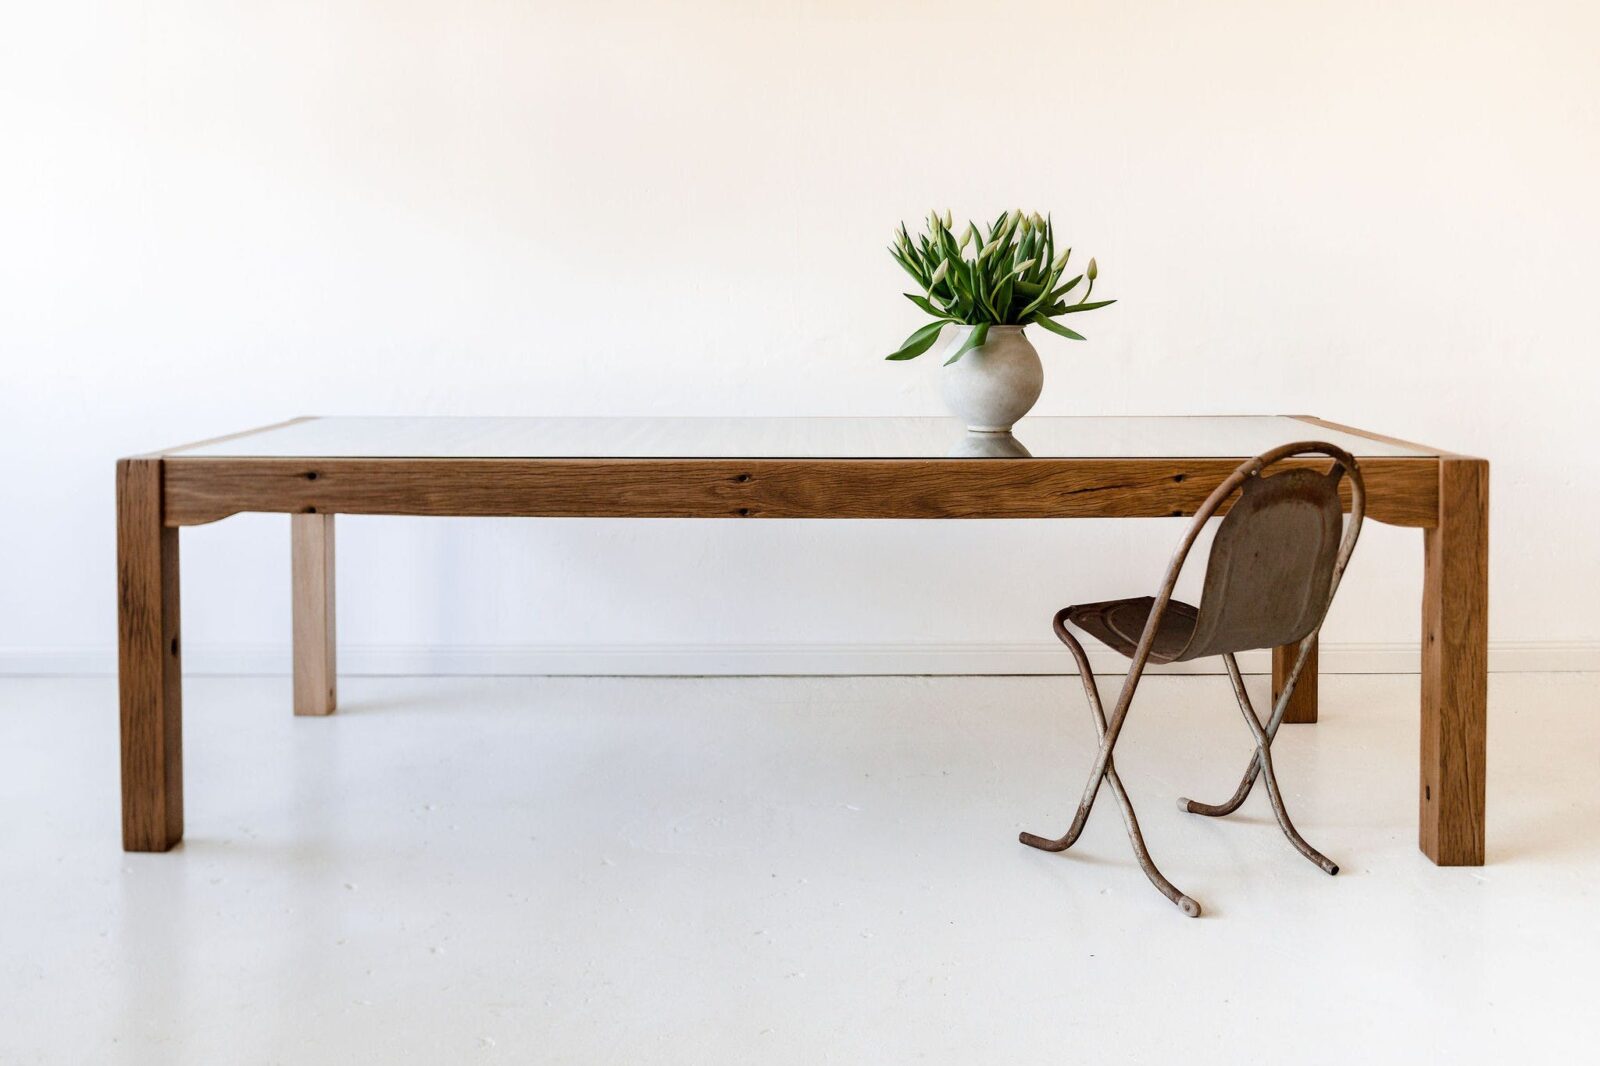 A replica wool classing table made from recycled slats from the flooring of a local wool shed.